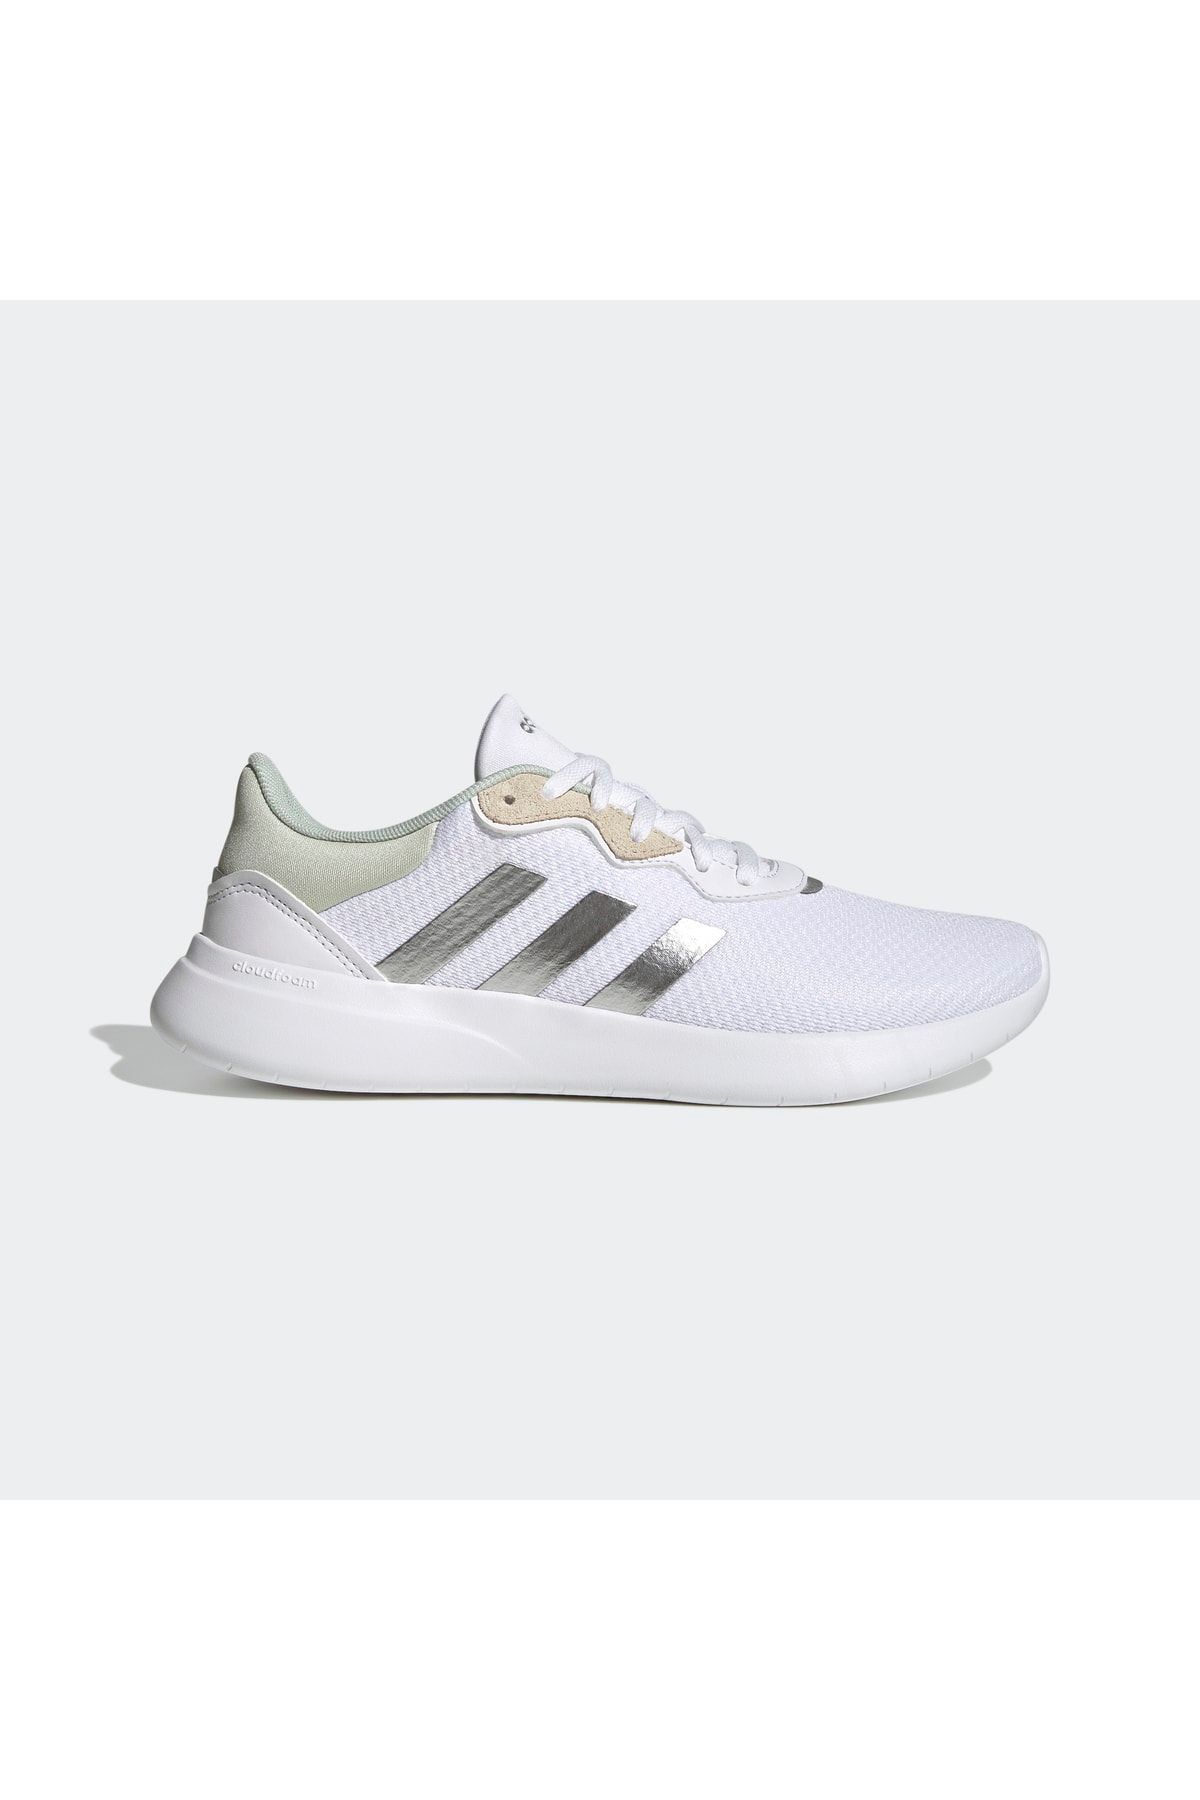 adidas Gy9243 Gy9243 Qt Racer 3.0